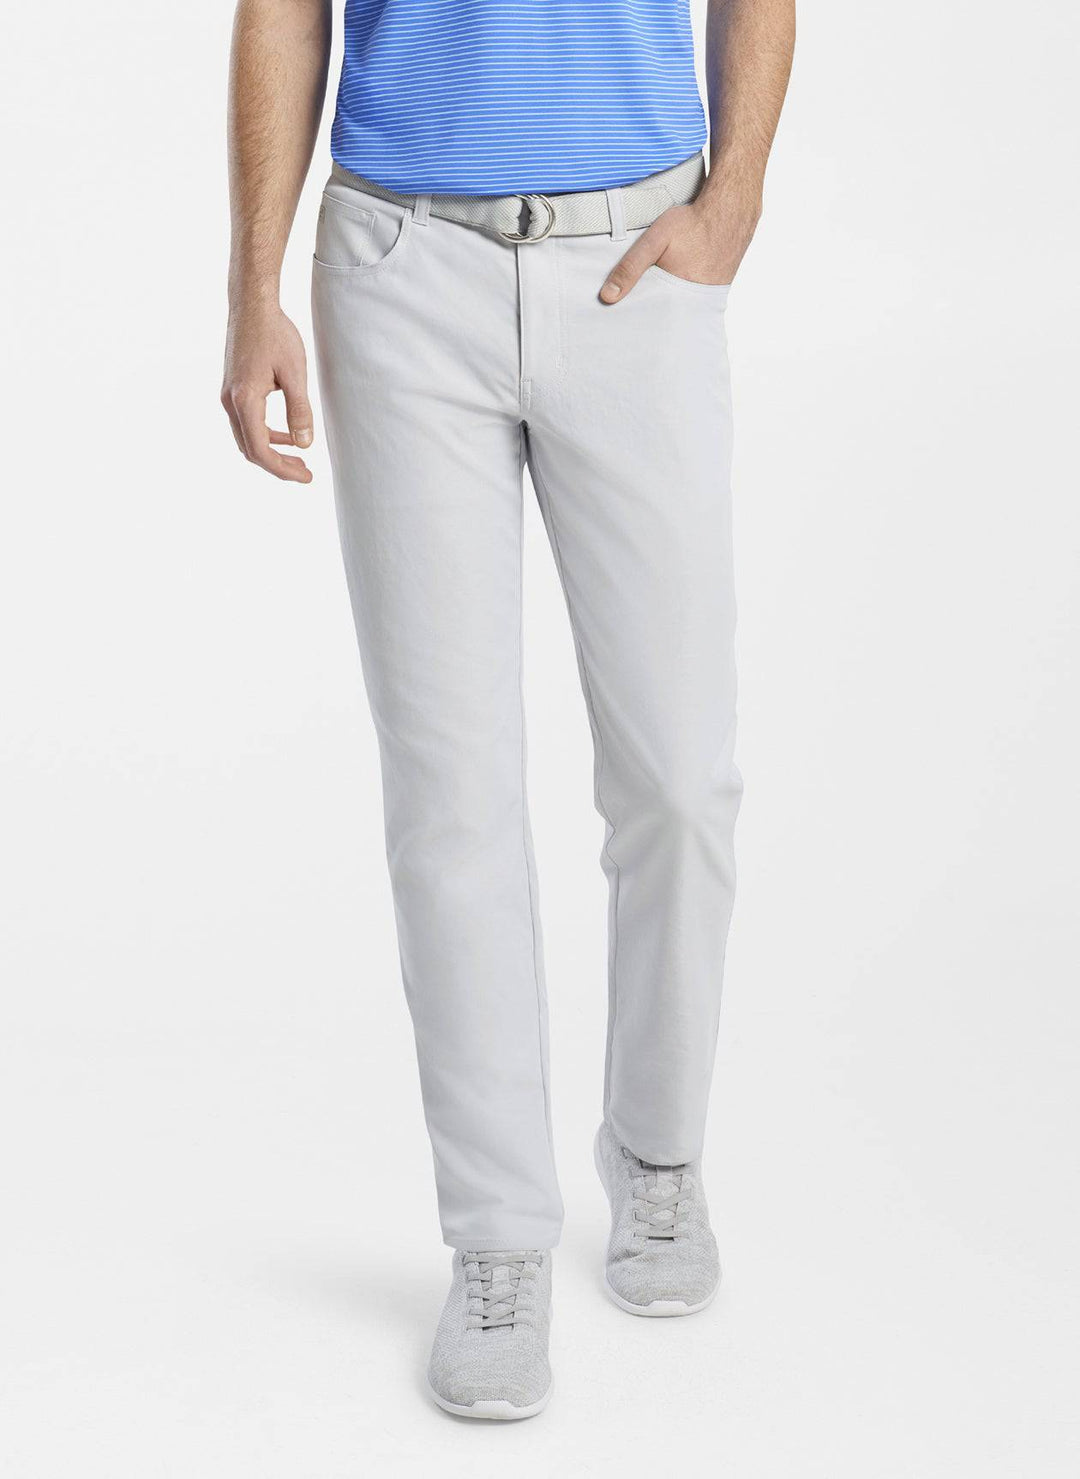 eb66 Performance Five-Pocket Pant in Stone by Peter Millar